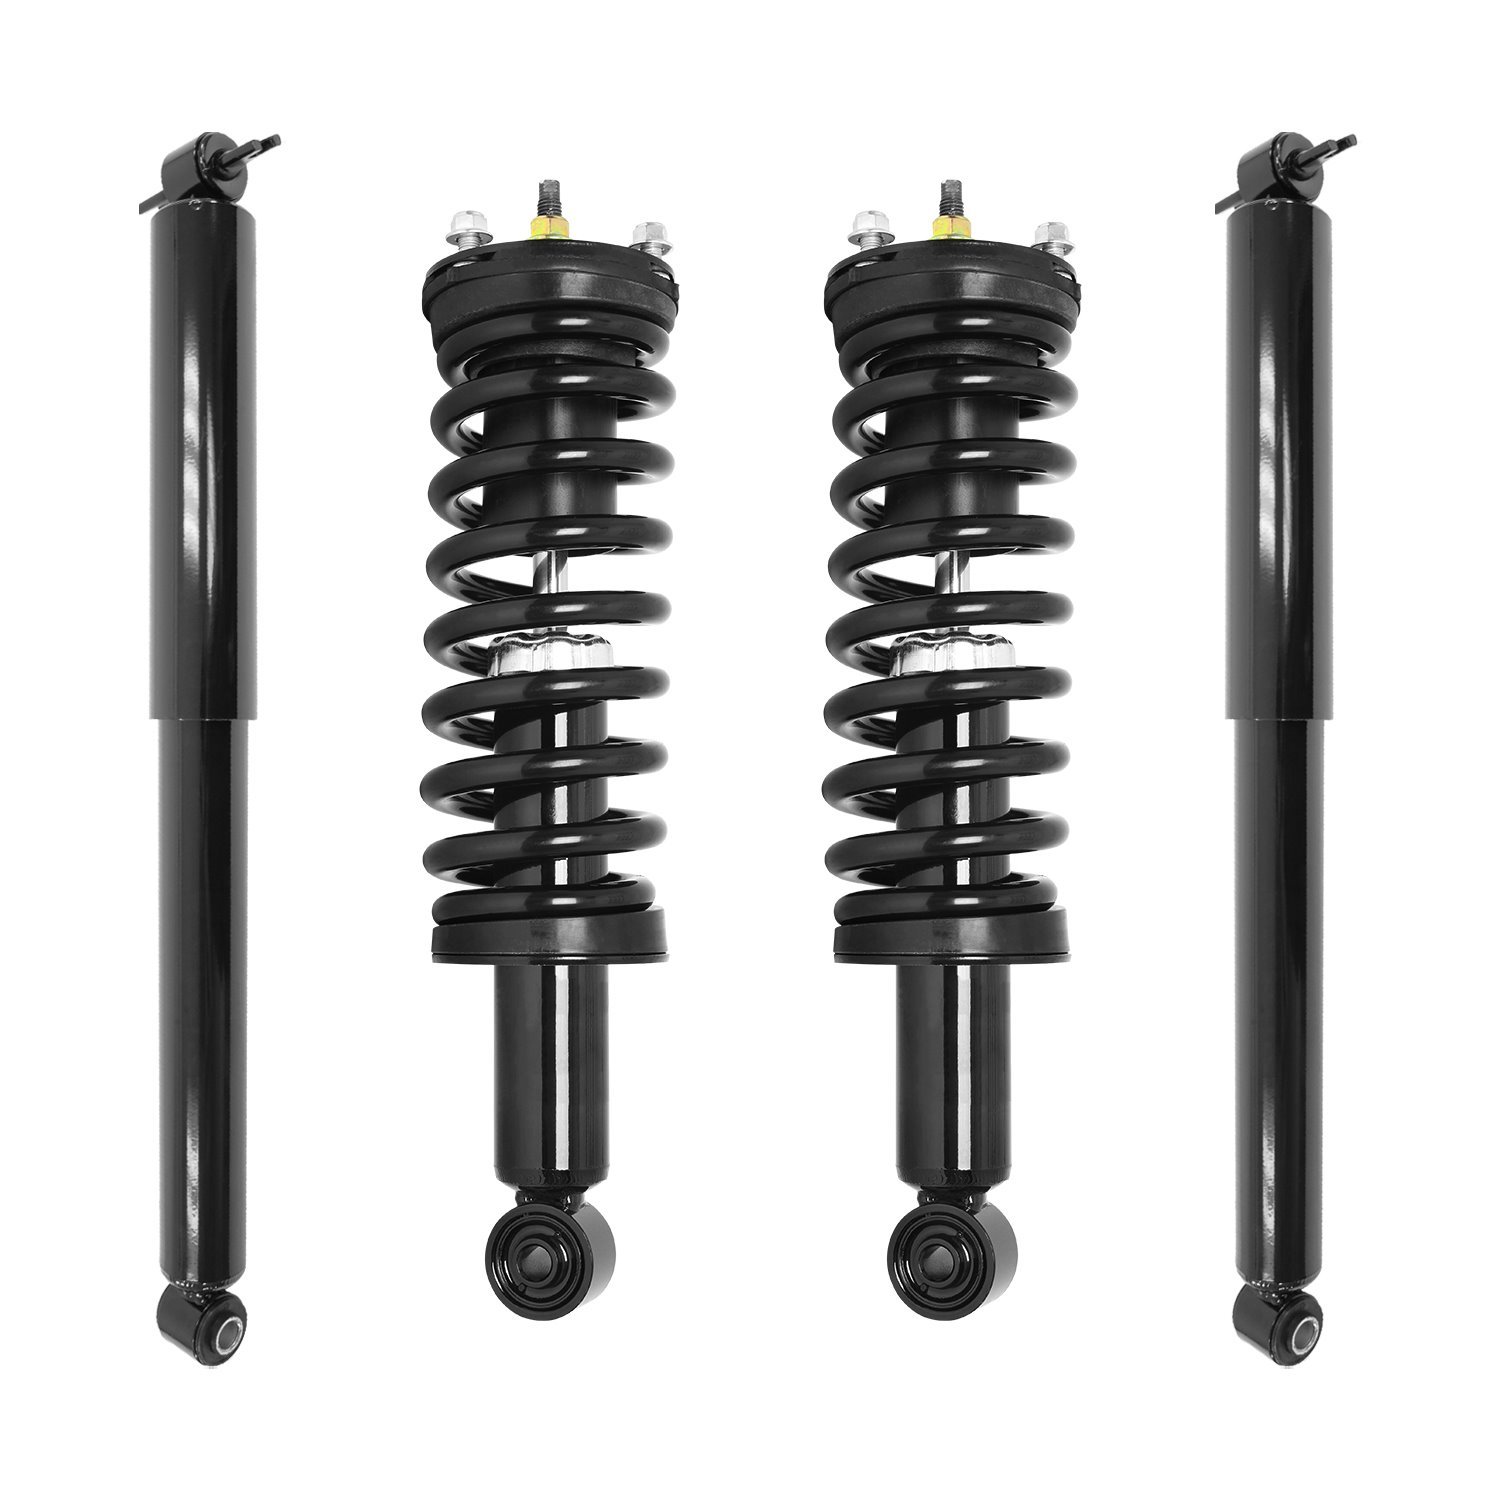 4-11600-251270-001 Front & Rear Suspension Strut & Coil Spring Assembly Fits Select GM